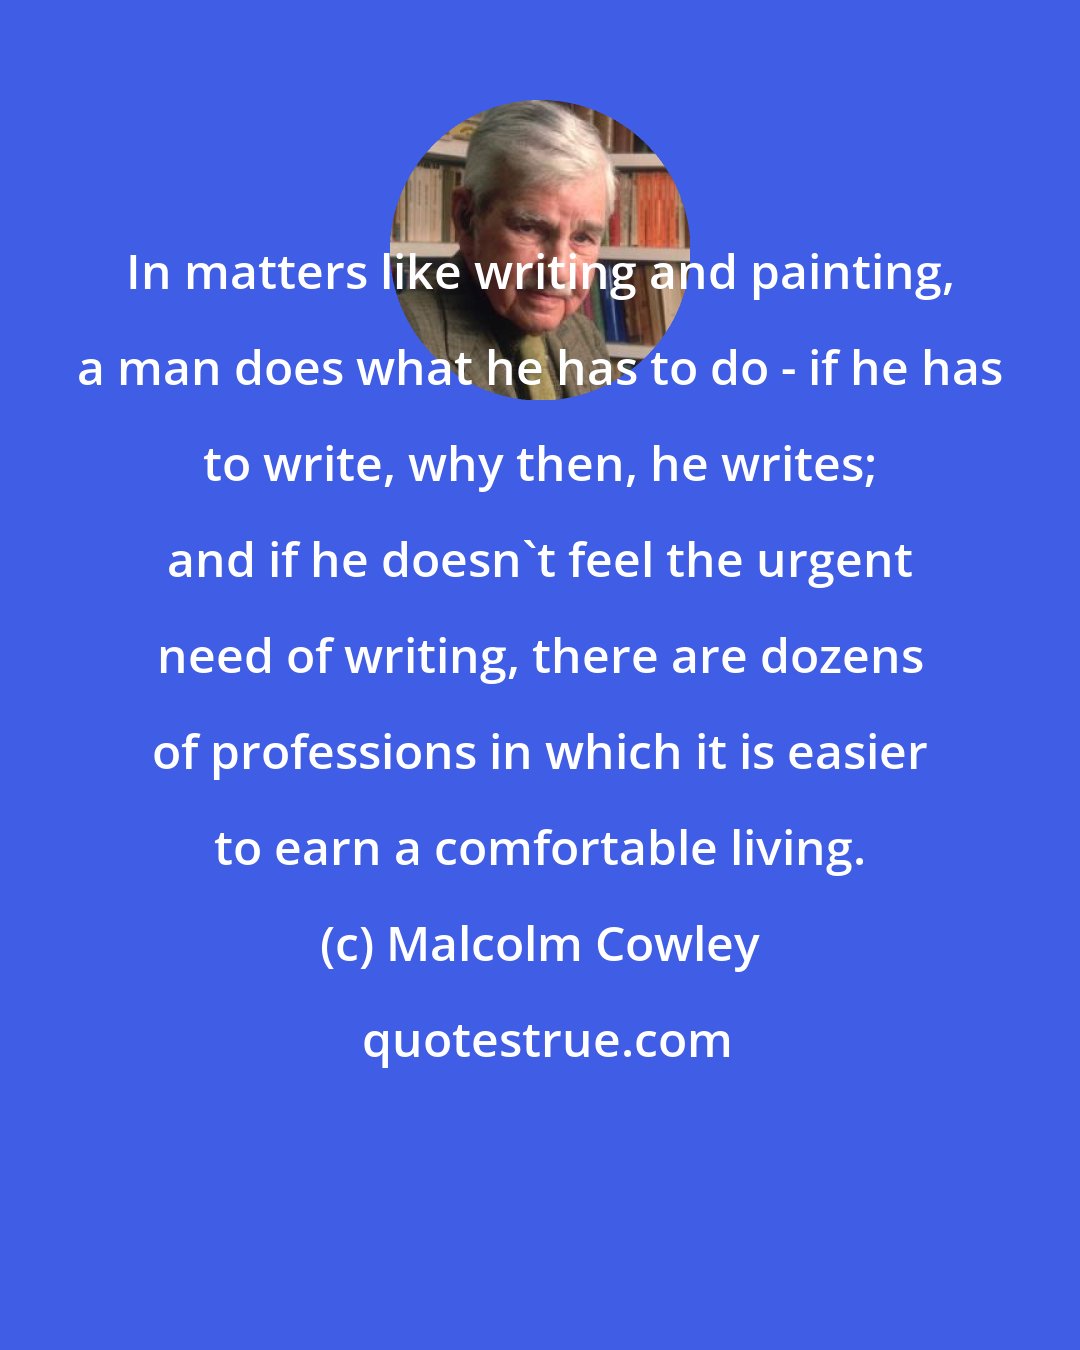 Malcolm Cowley: In matters like writing and painting, a man does what he has to do - if he has to write, why then, he writes; and if he doesn't feel the urgent need of writing, there are dozens of professions in which it is easier to earn a comfortable living.